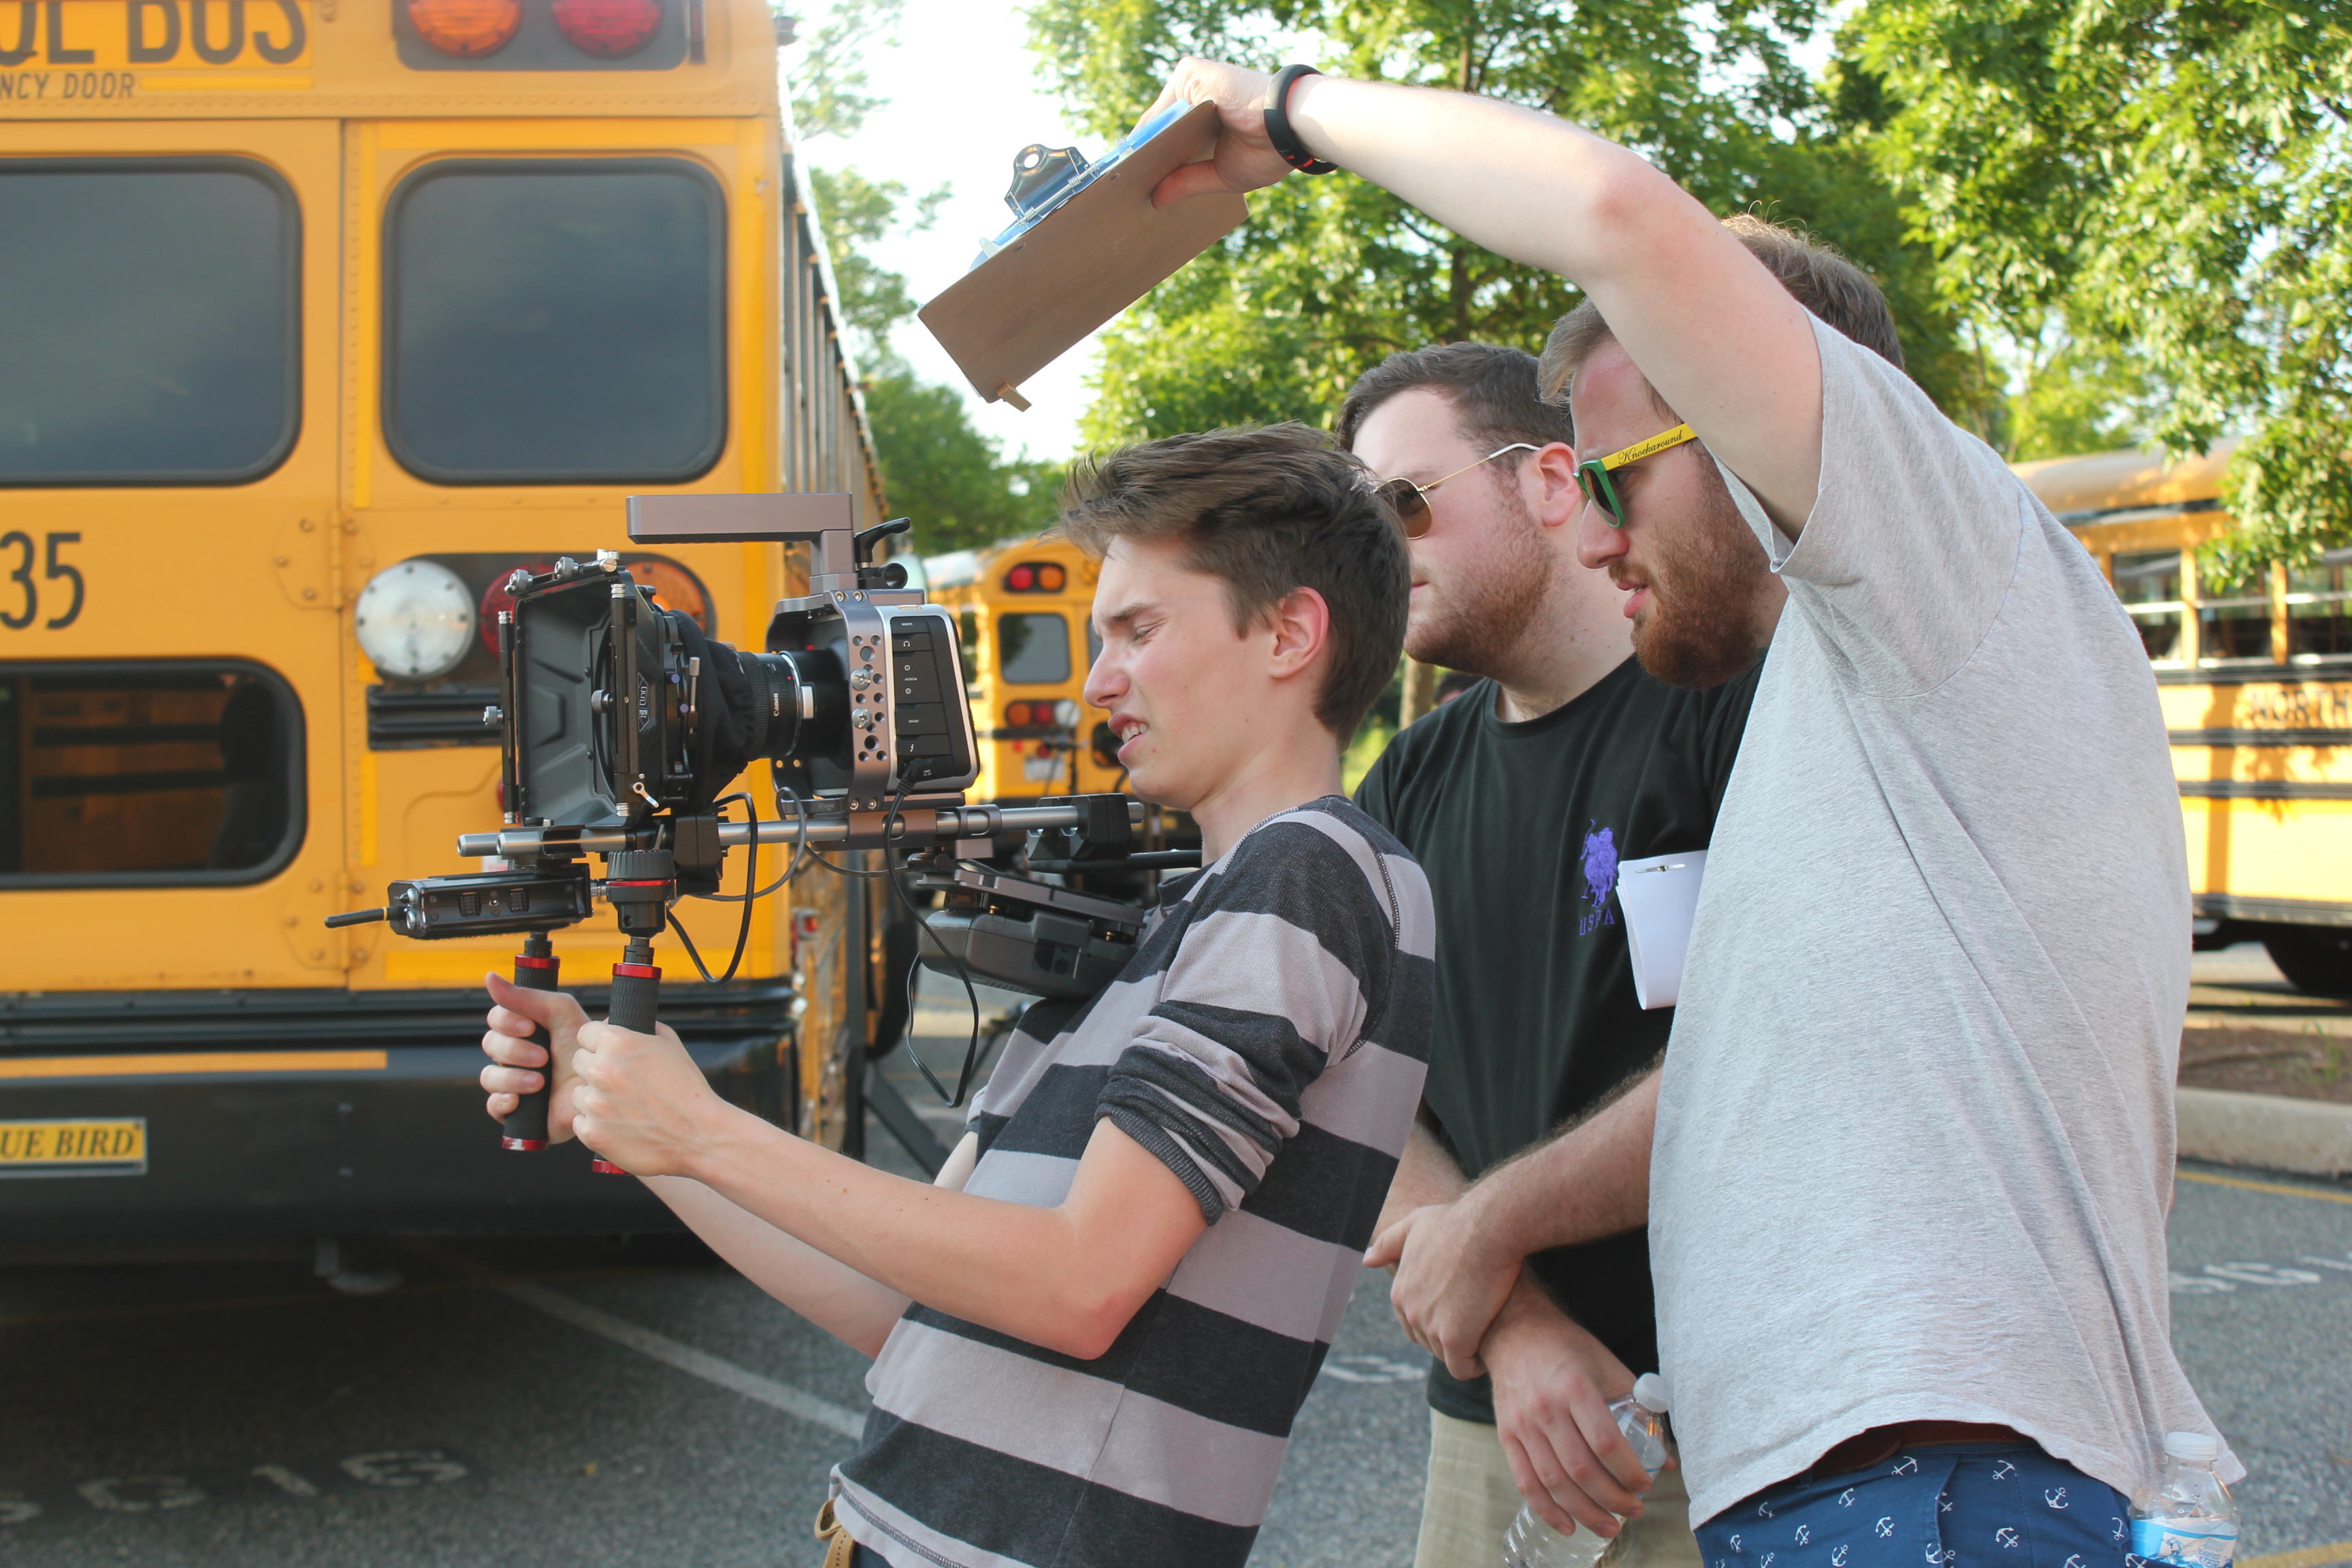 Johno Faherty looks over Director of Photography, Joe Staehly's shoulder to view the shot on the set of Witch Hunt